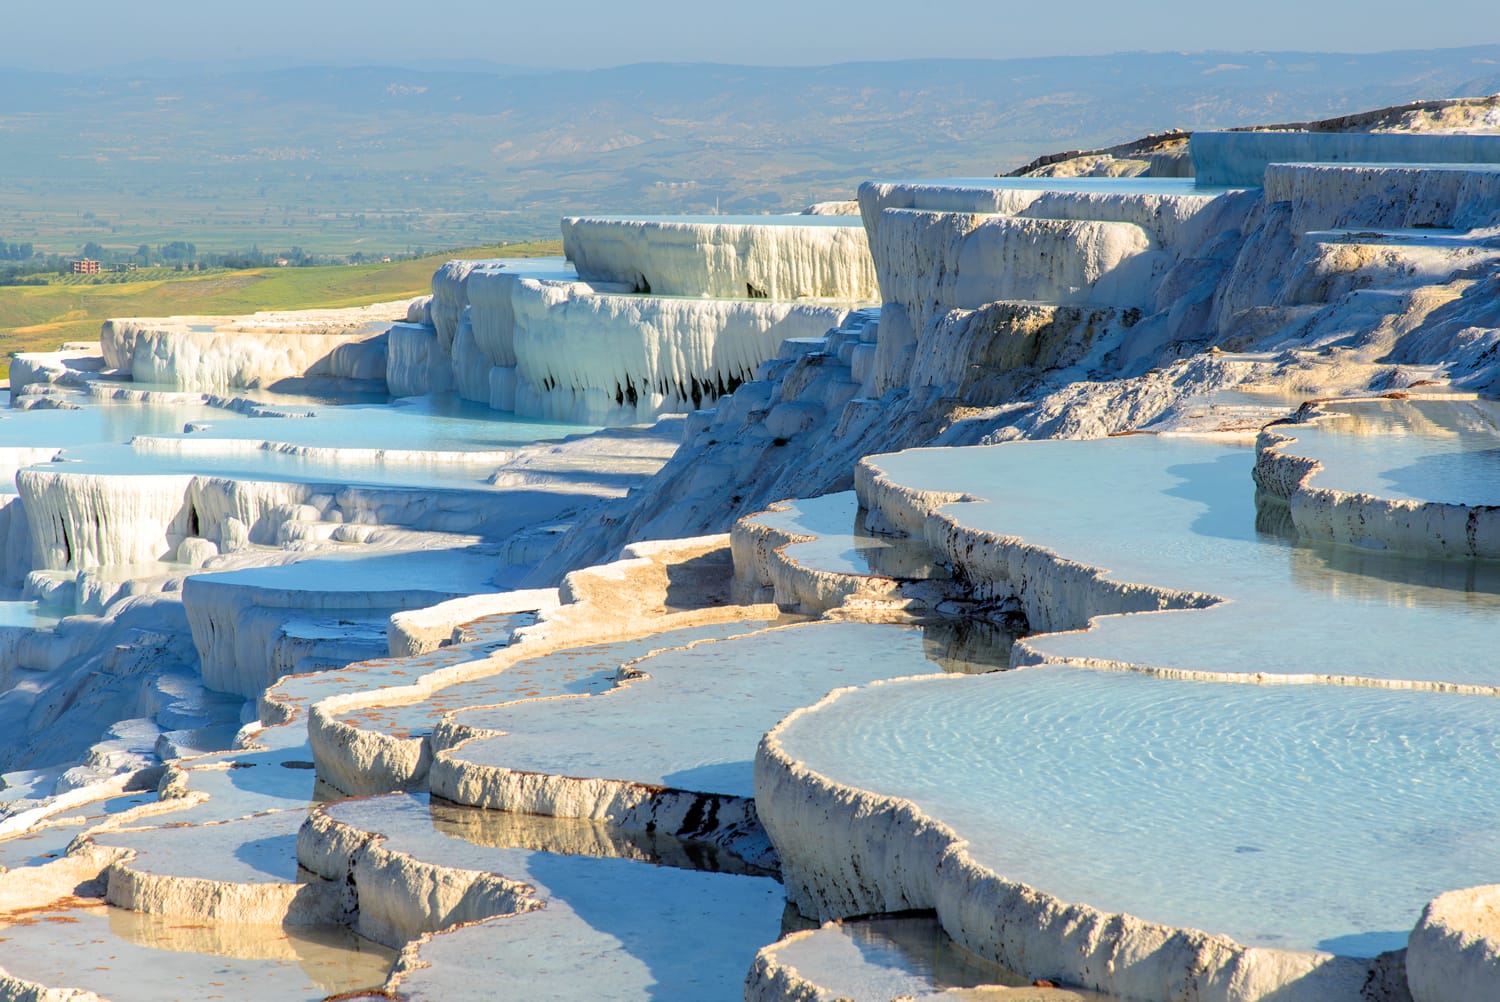 The enchanting pools of Pamukkale in Turkey. Pamukkale contains hot springs and travertines, terraces of carbonate minerals left by the flowing water. The site is a UNESCO World Heritage Site.